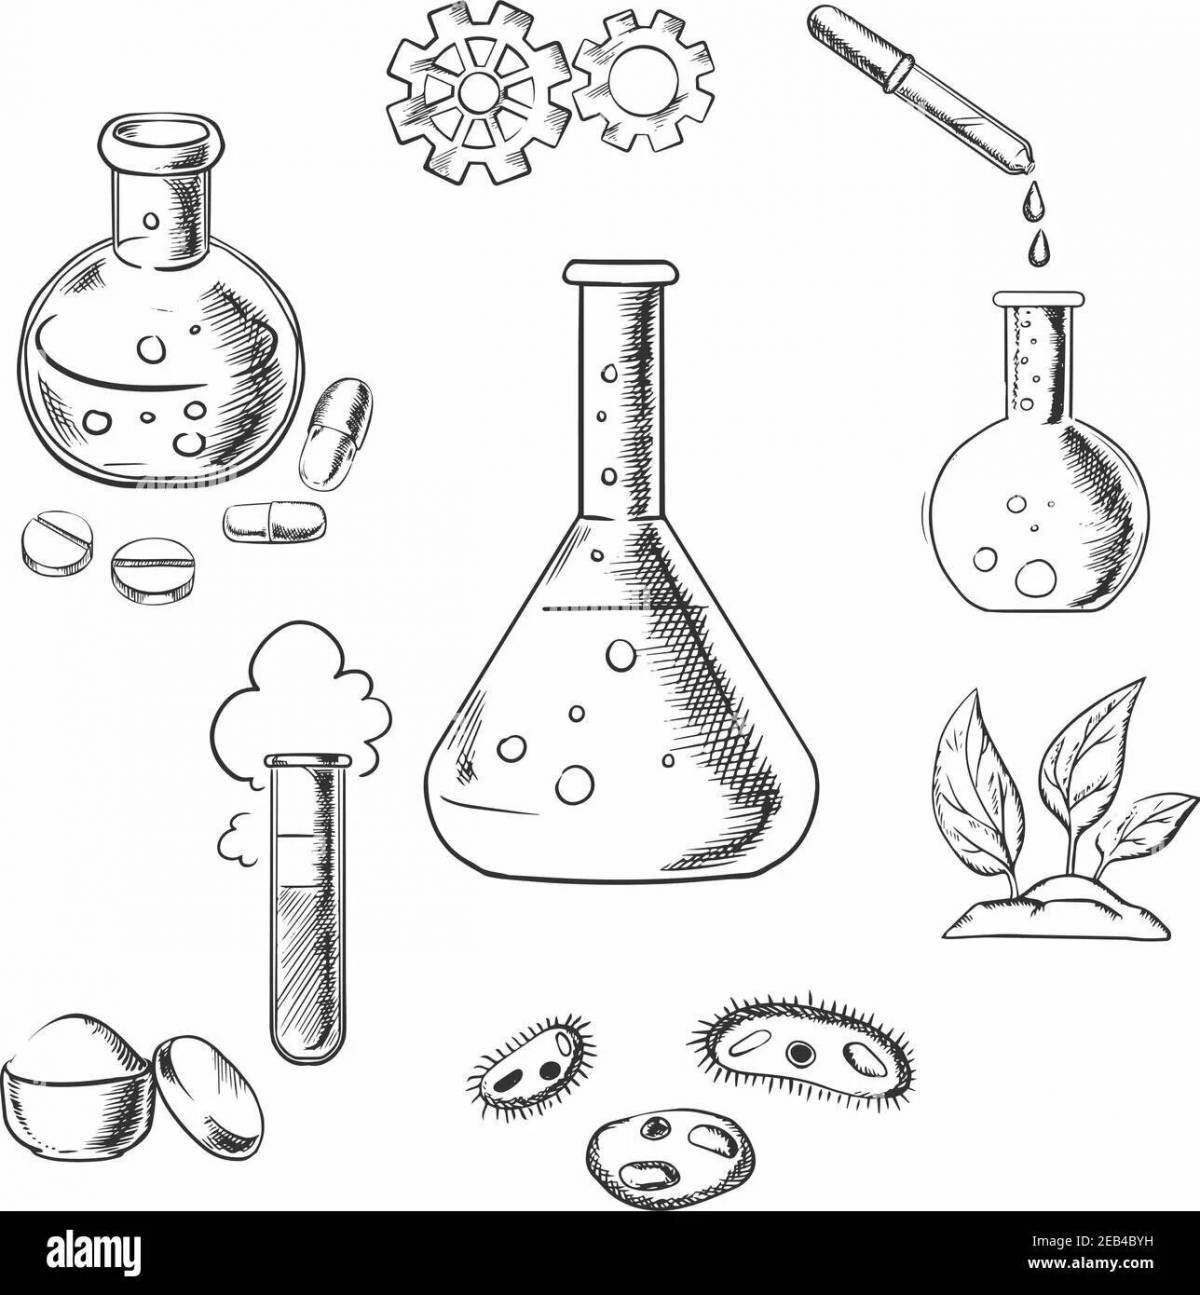 Luxury chemical flasks coloring book